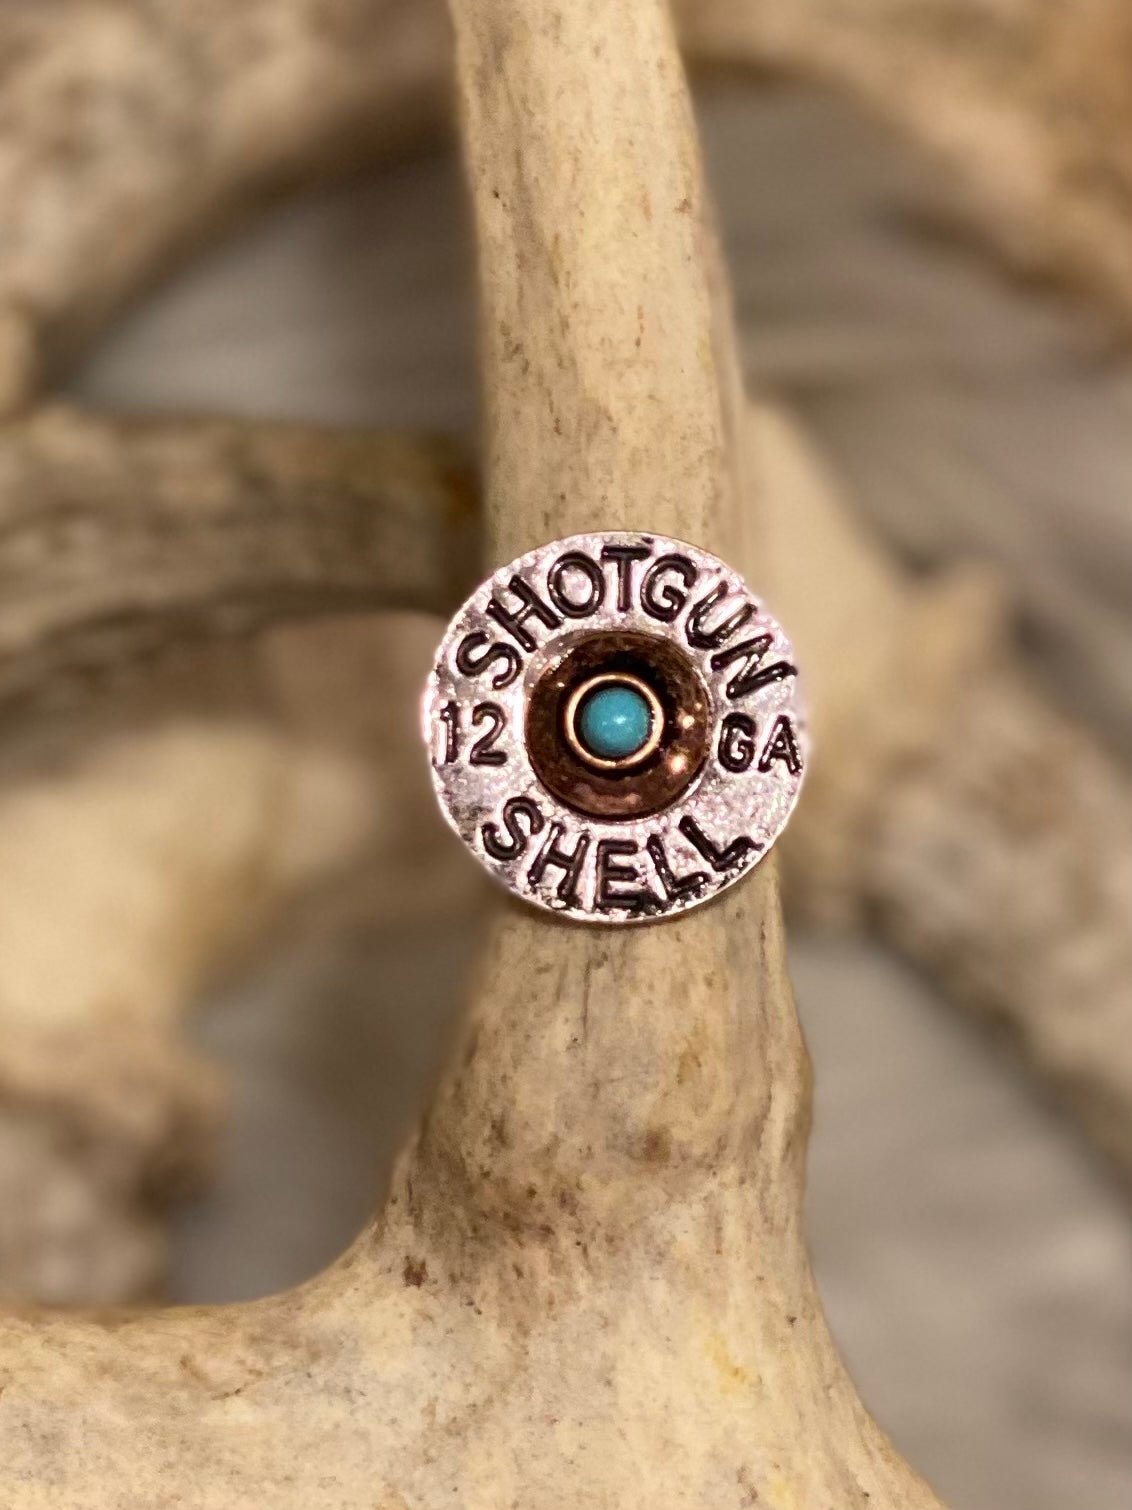 Hit’em With Your Best Shot Ring - CountryFide Custom Accessories and Outdoors